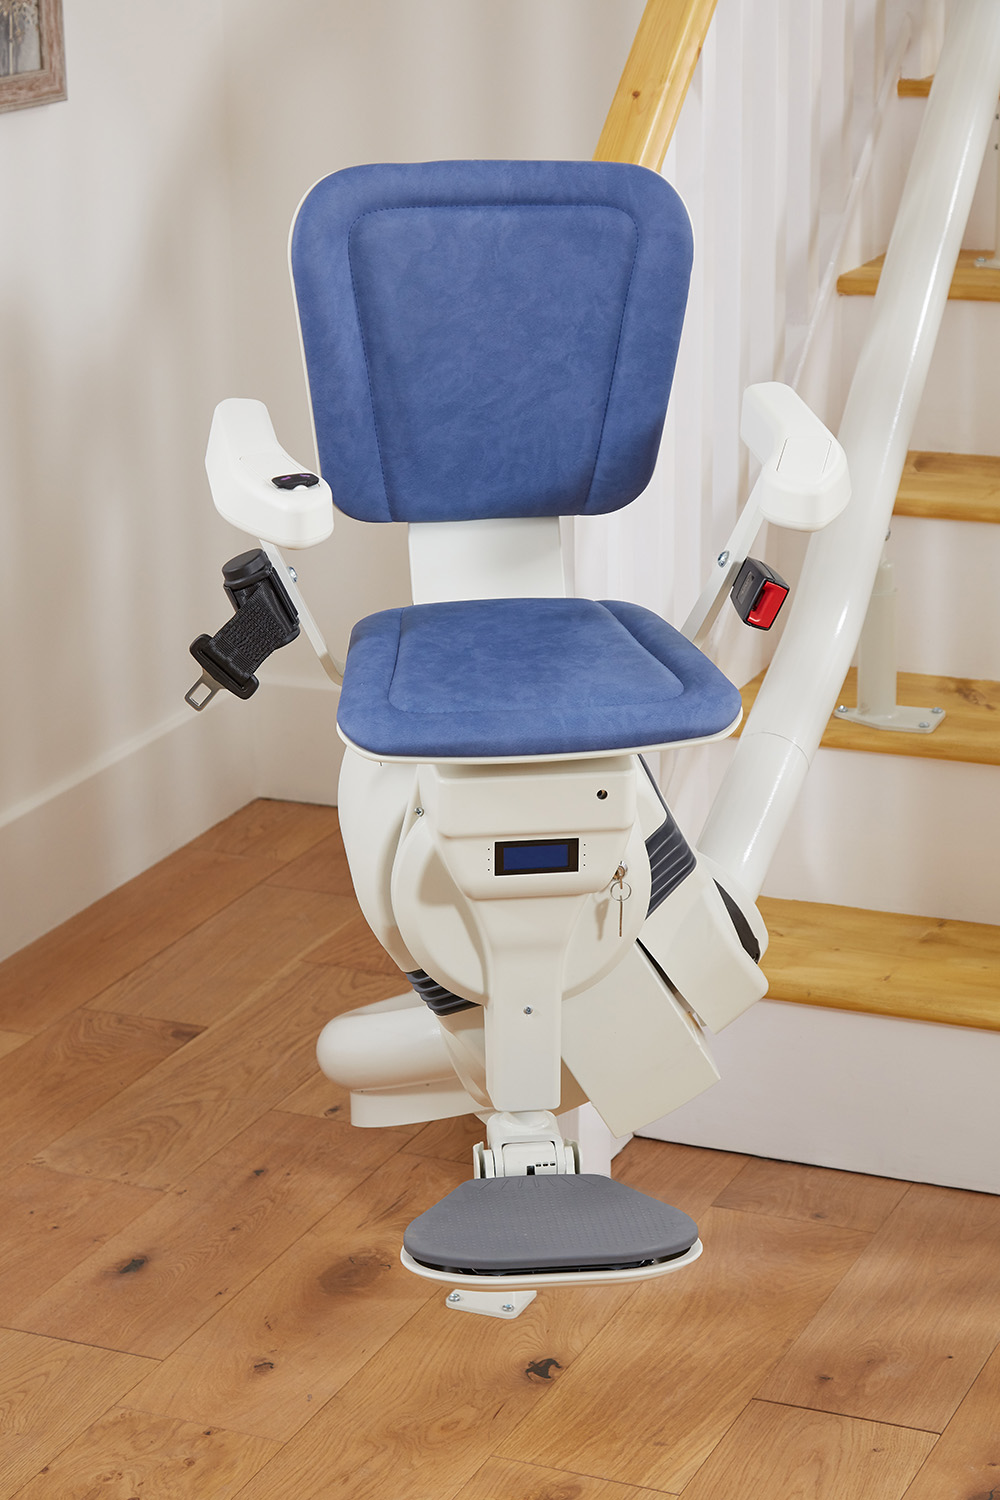 Platinum Ultimate stairlift